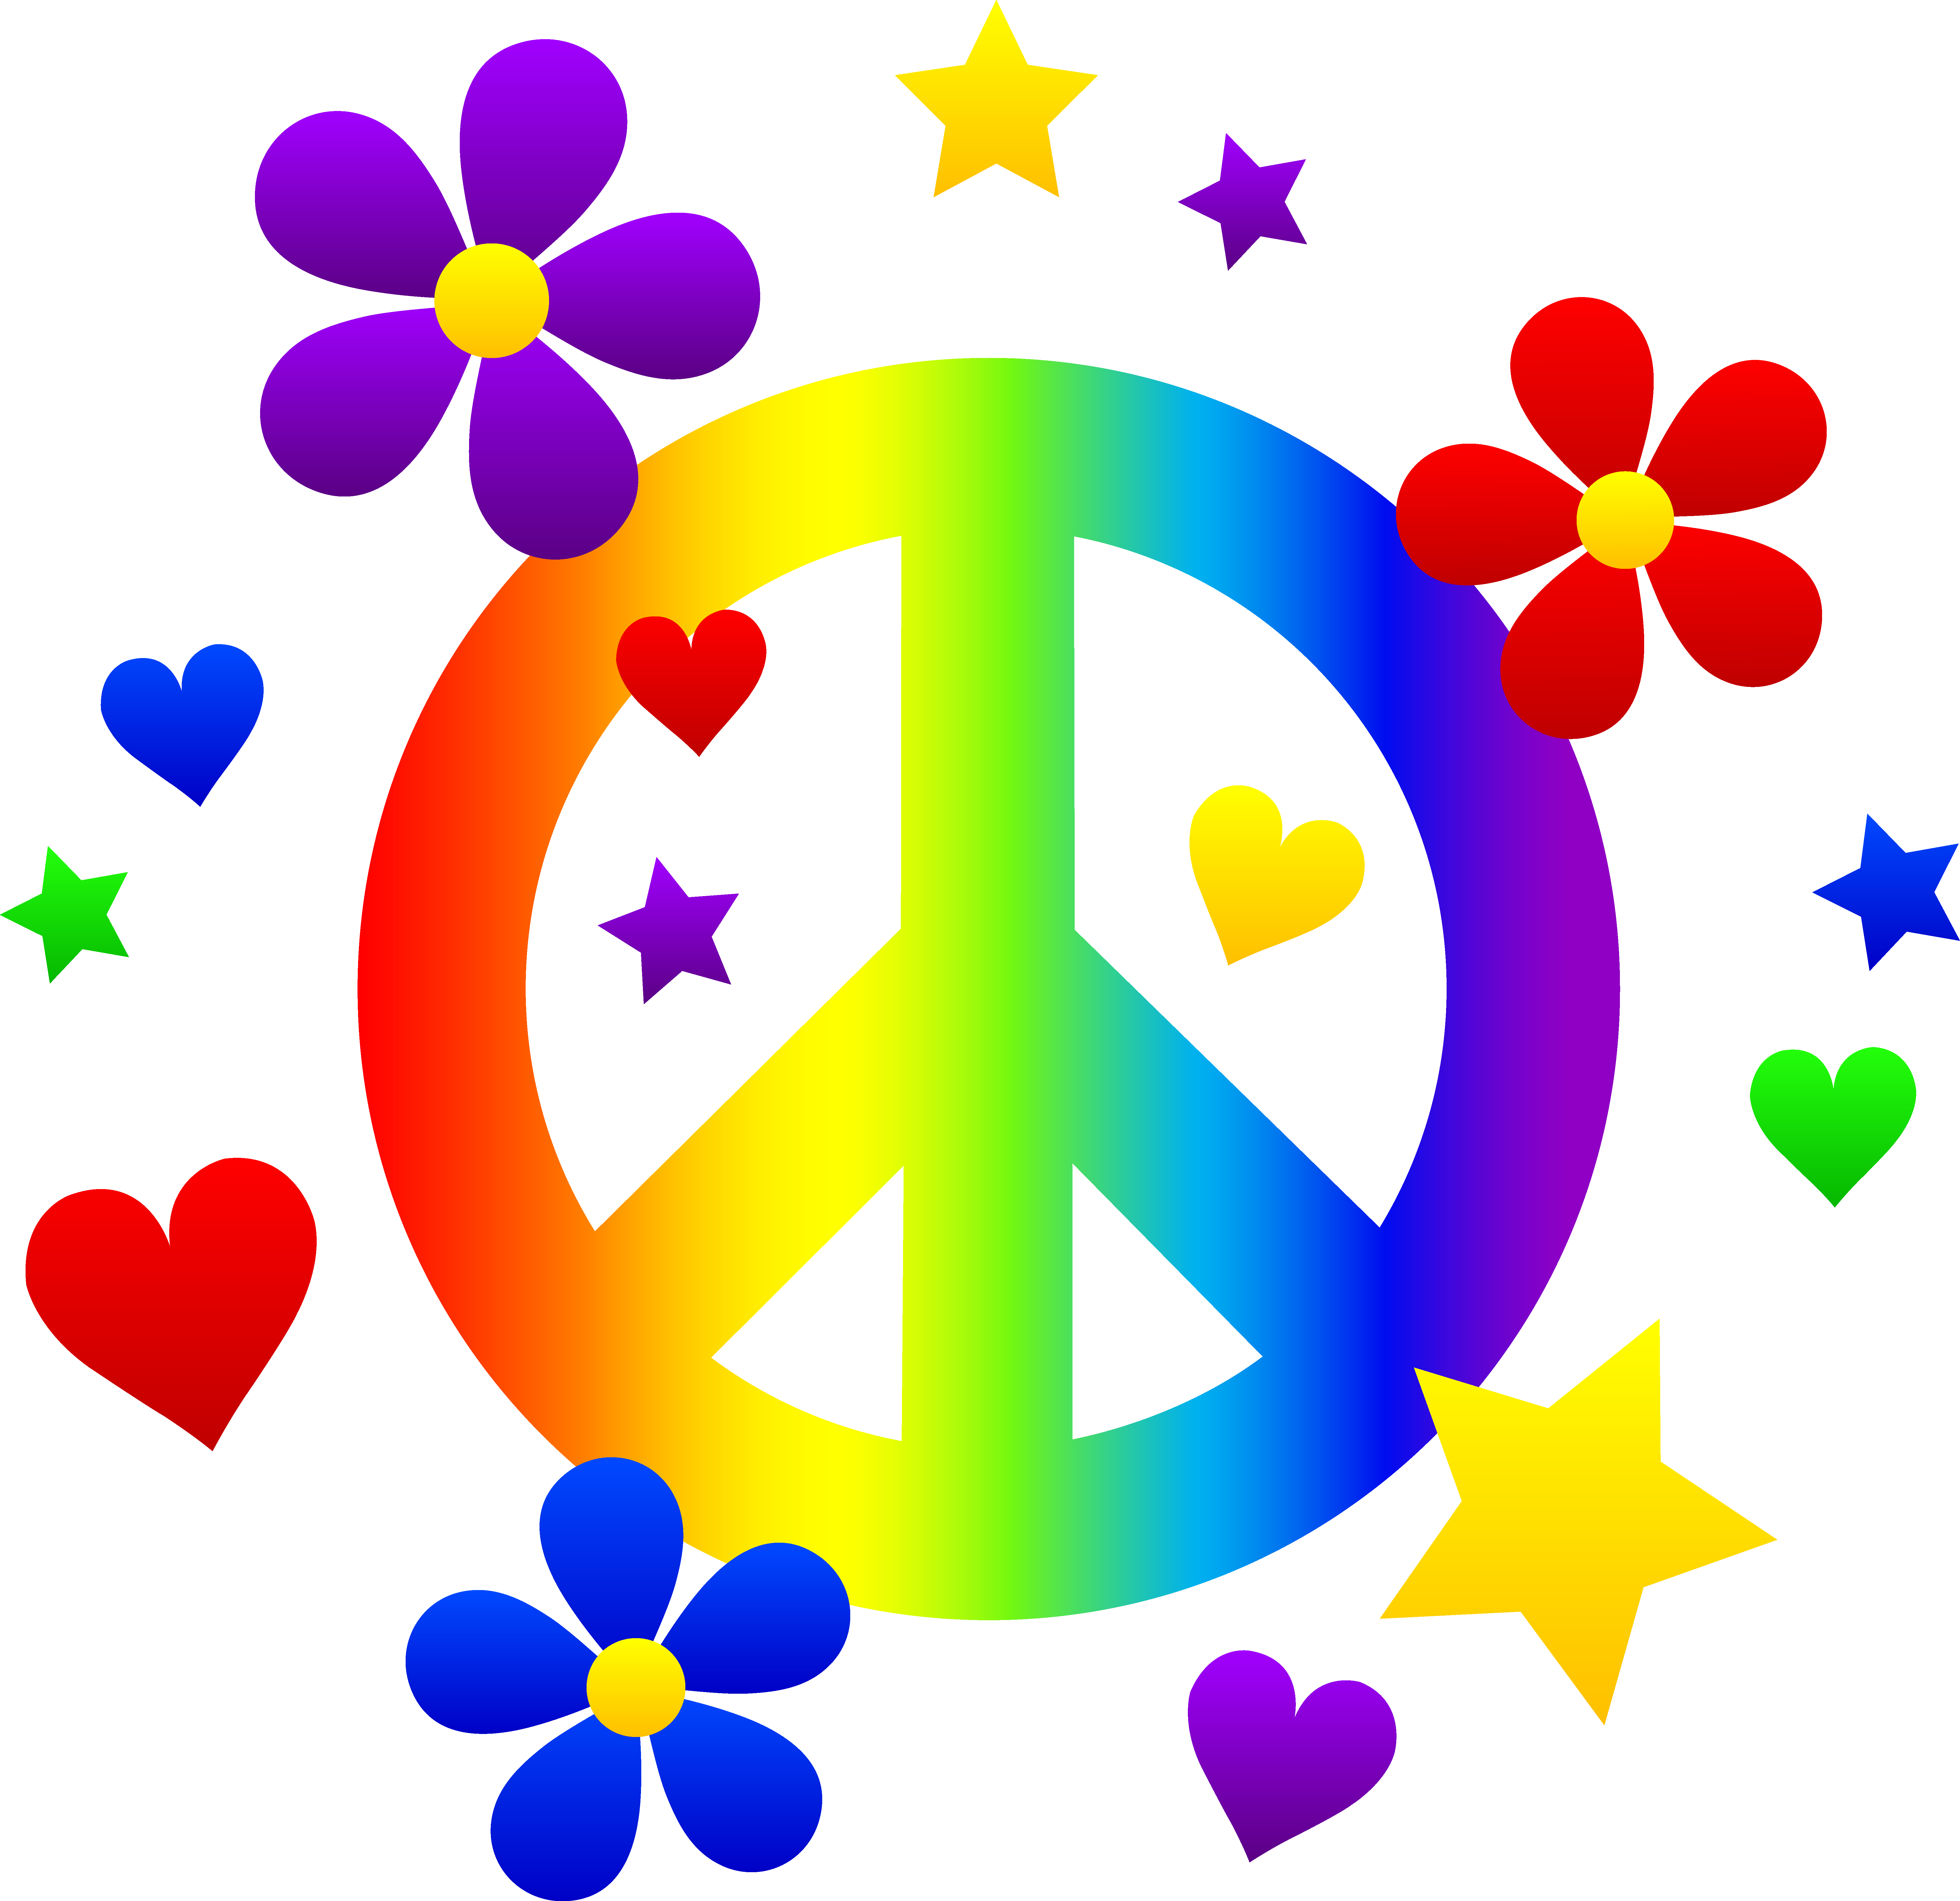 Peace Sign With Flowers Hearts and Stars - Free Clip Art